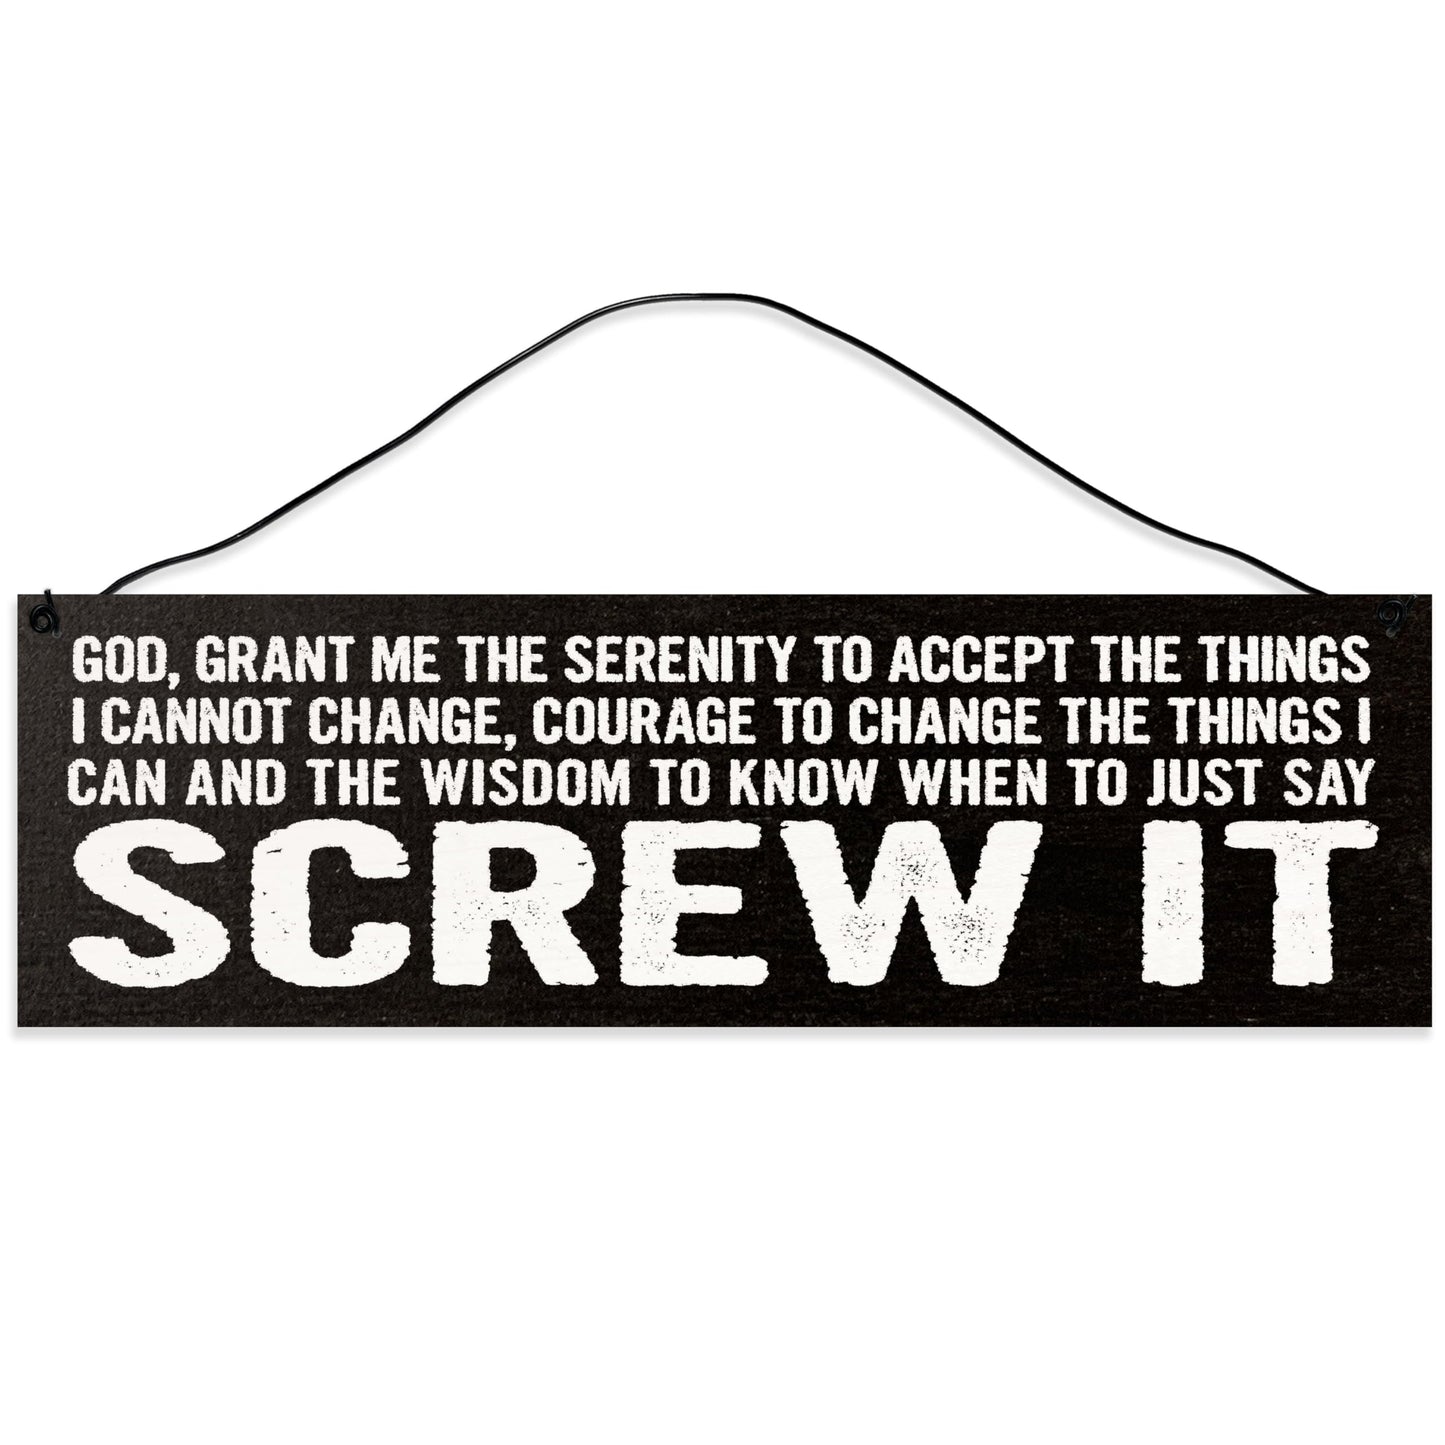 Screw it. Serenity Prayer | Handmade | Wood Sign | Wire Hanger/Stand | UV Printed | Solid Maple